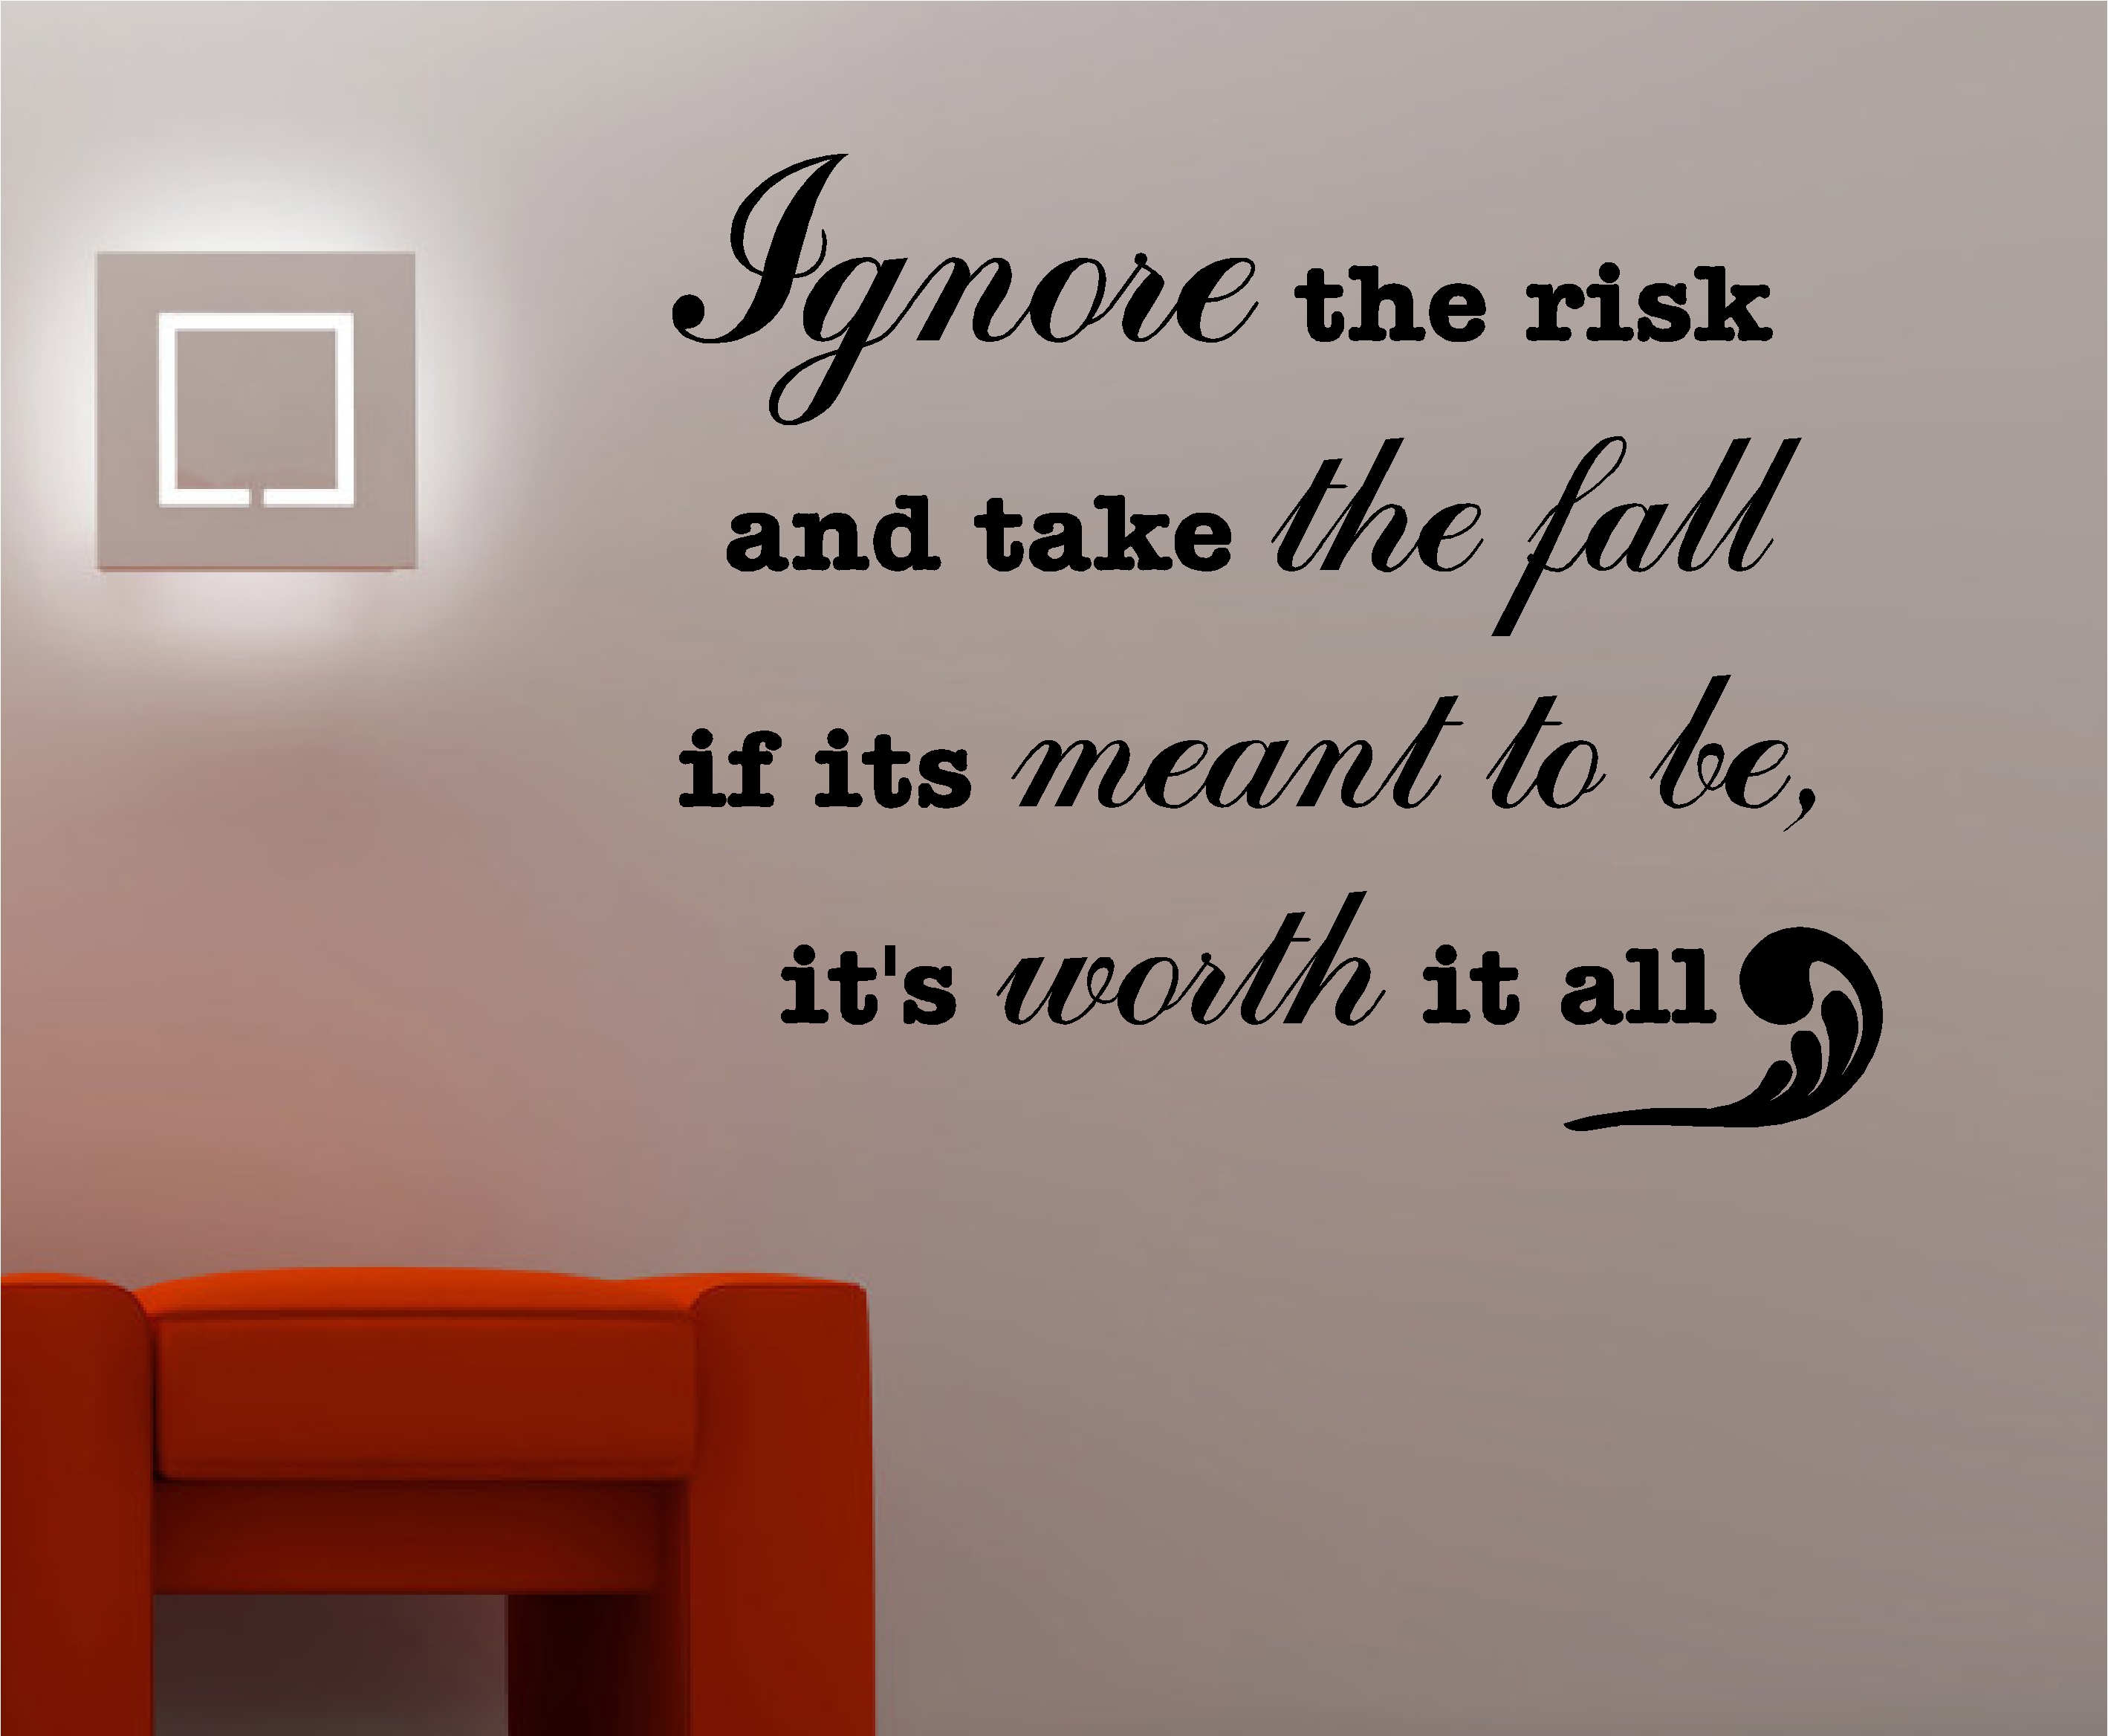 Ignore the risk inspirational wall art quote sticker vinyl ...